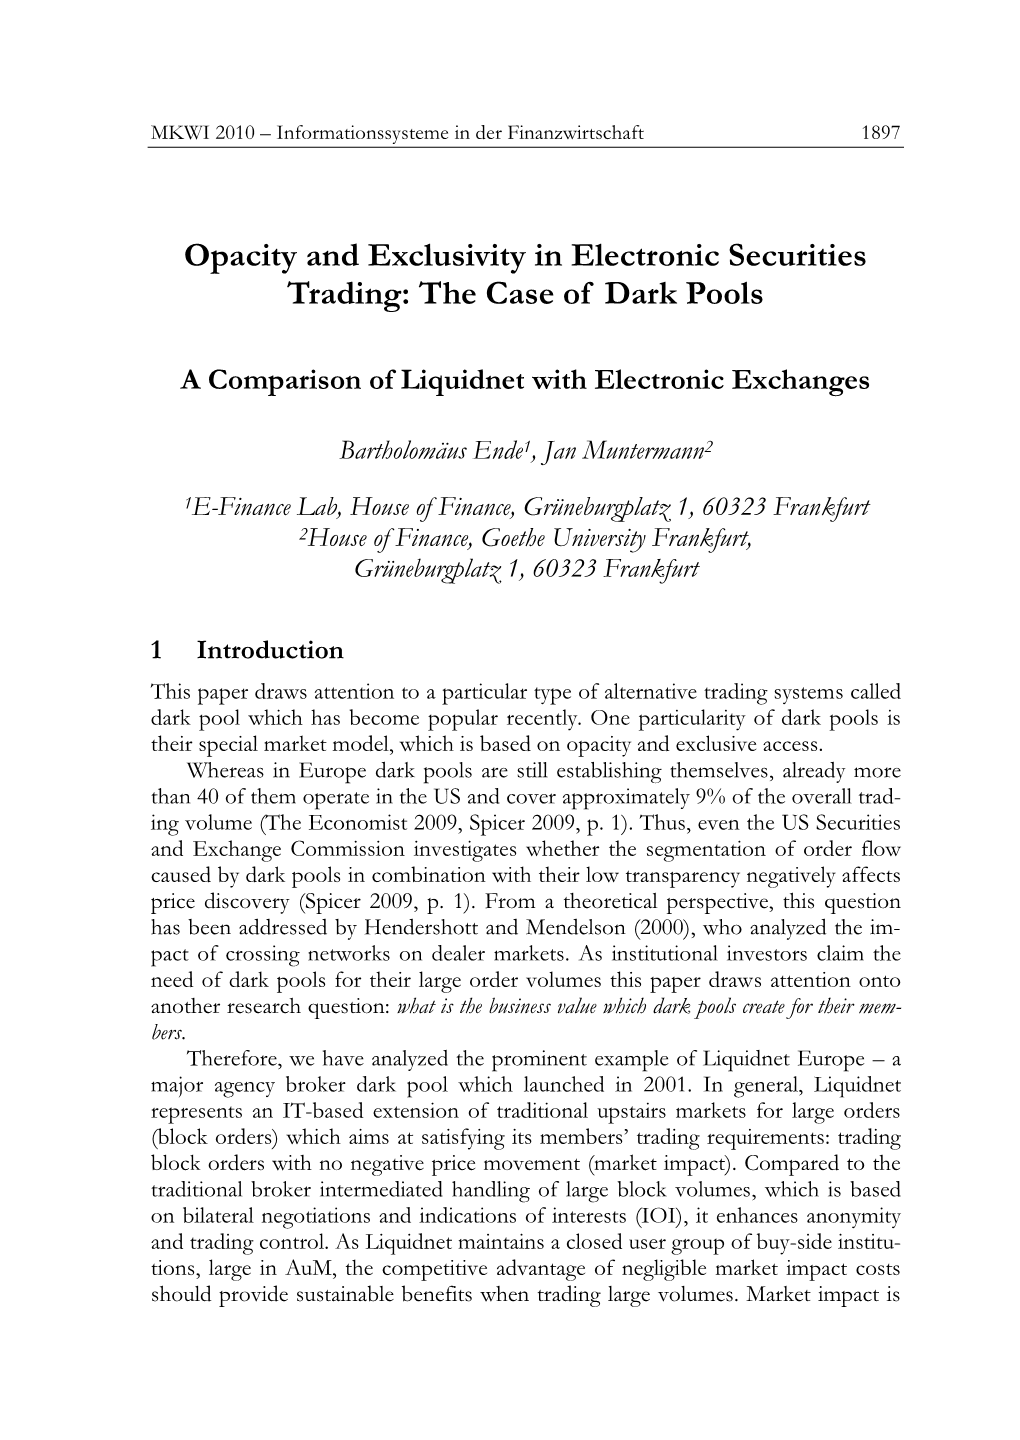 Opacity and Exclusivity in Electronic Securities Trading: the Case of Dark Pools